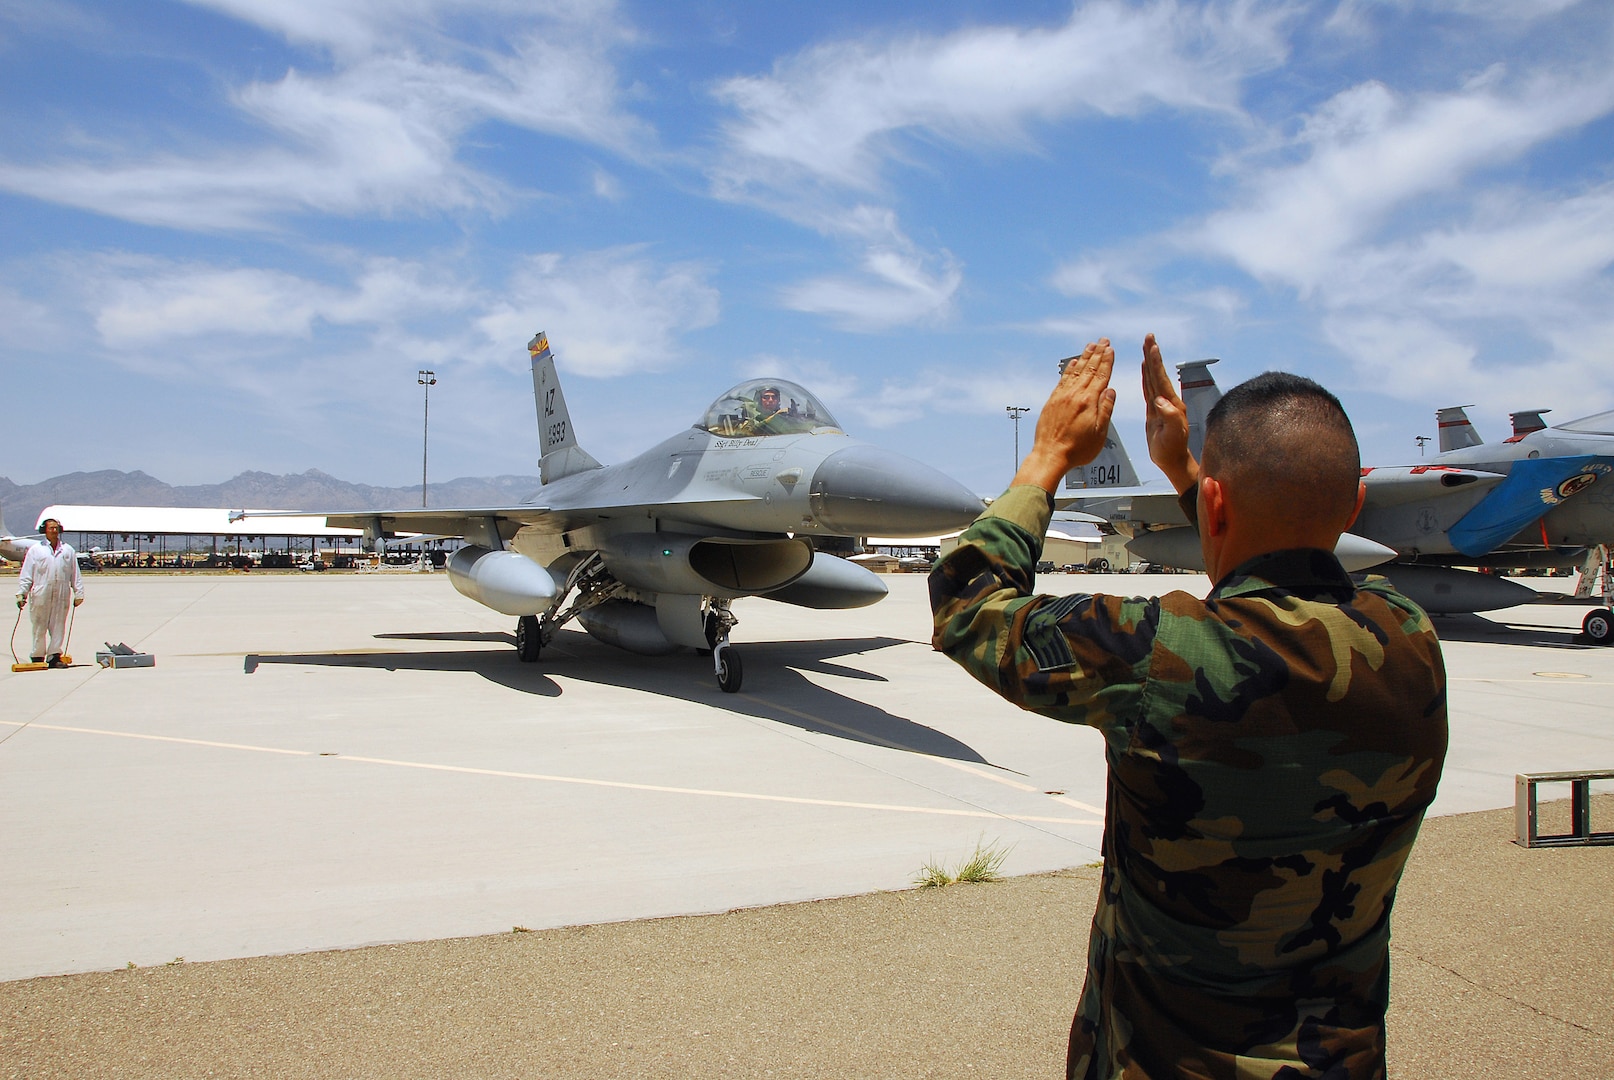 Staff Sgt. Michael Brizuela marshals the last operational F-16A model Fighting Falcon in the Air Force into a parking spot at Davis-Monthan Air Force Base, Ariz. The aircraft is being retired by the Arizona Air National Guard's 162nd Fighter Wing which now flies the more modern F-16C and F-16D models. This aircraft and two F-16Bs being retired will be stored at the Aerospace Maintenance and Regeneration Group at Davis-Monthan.